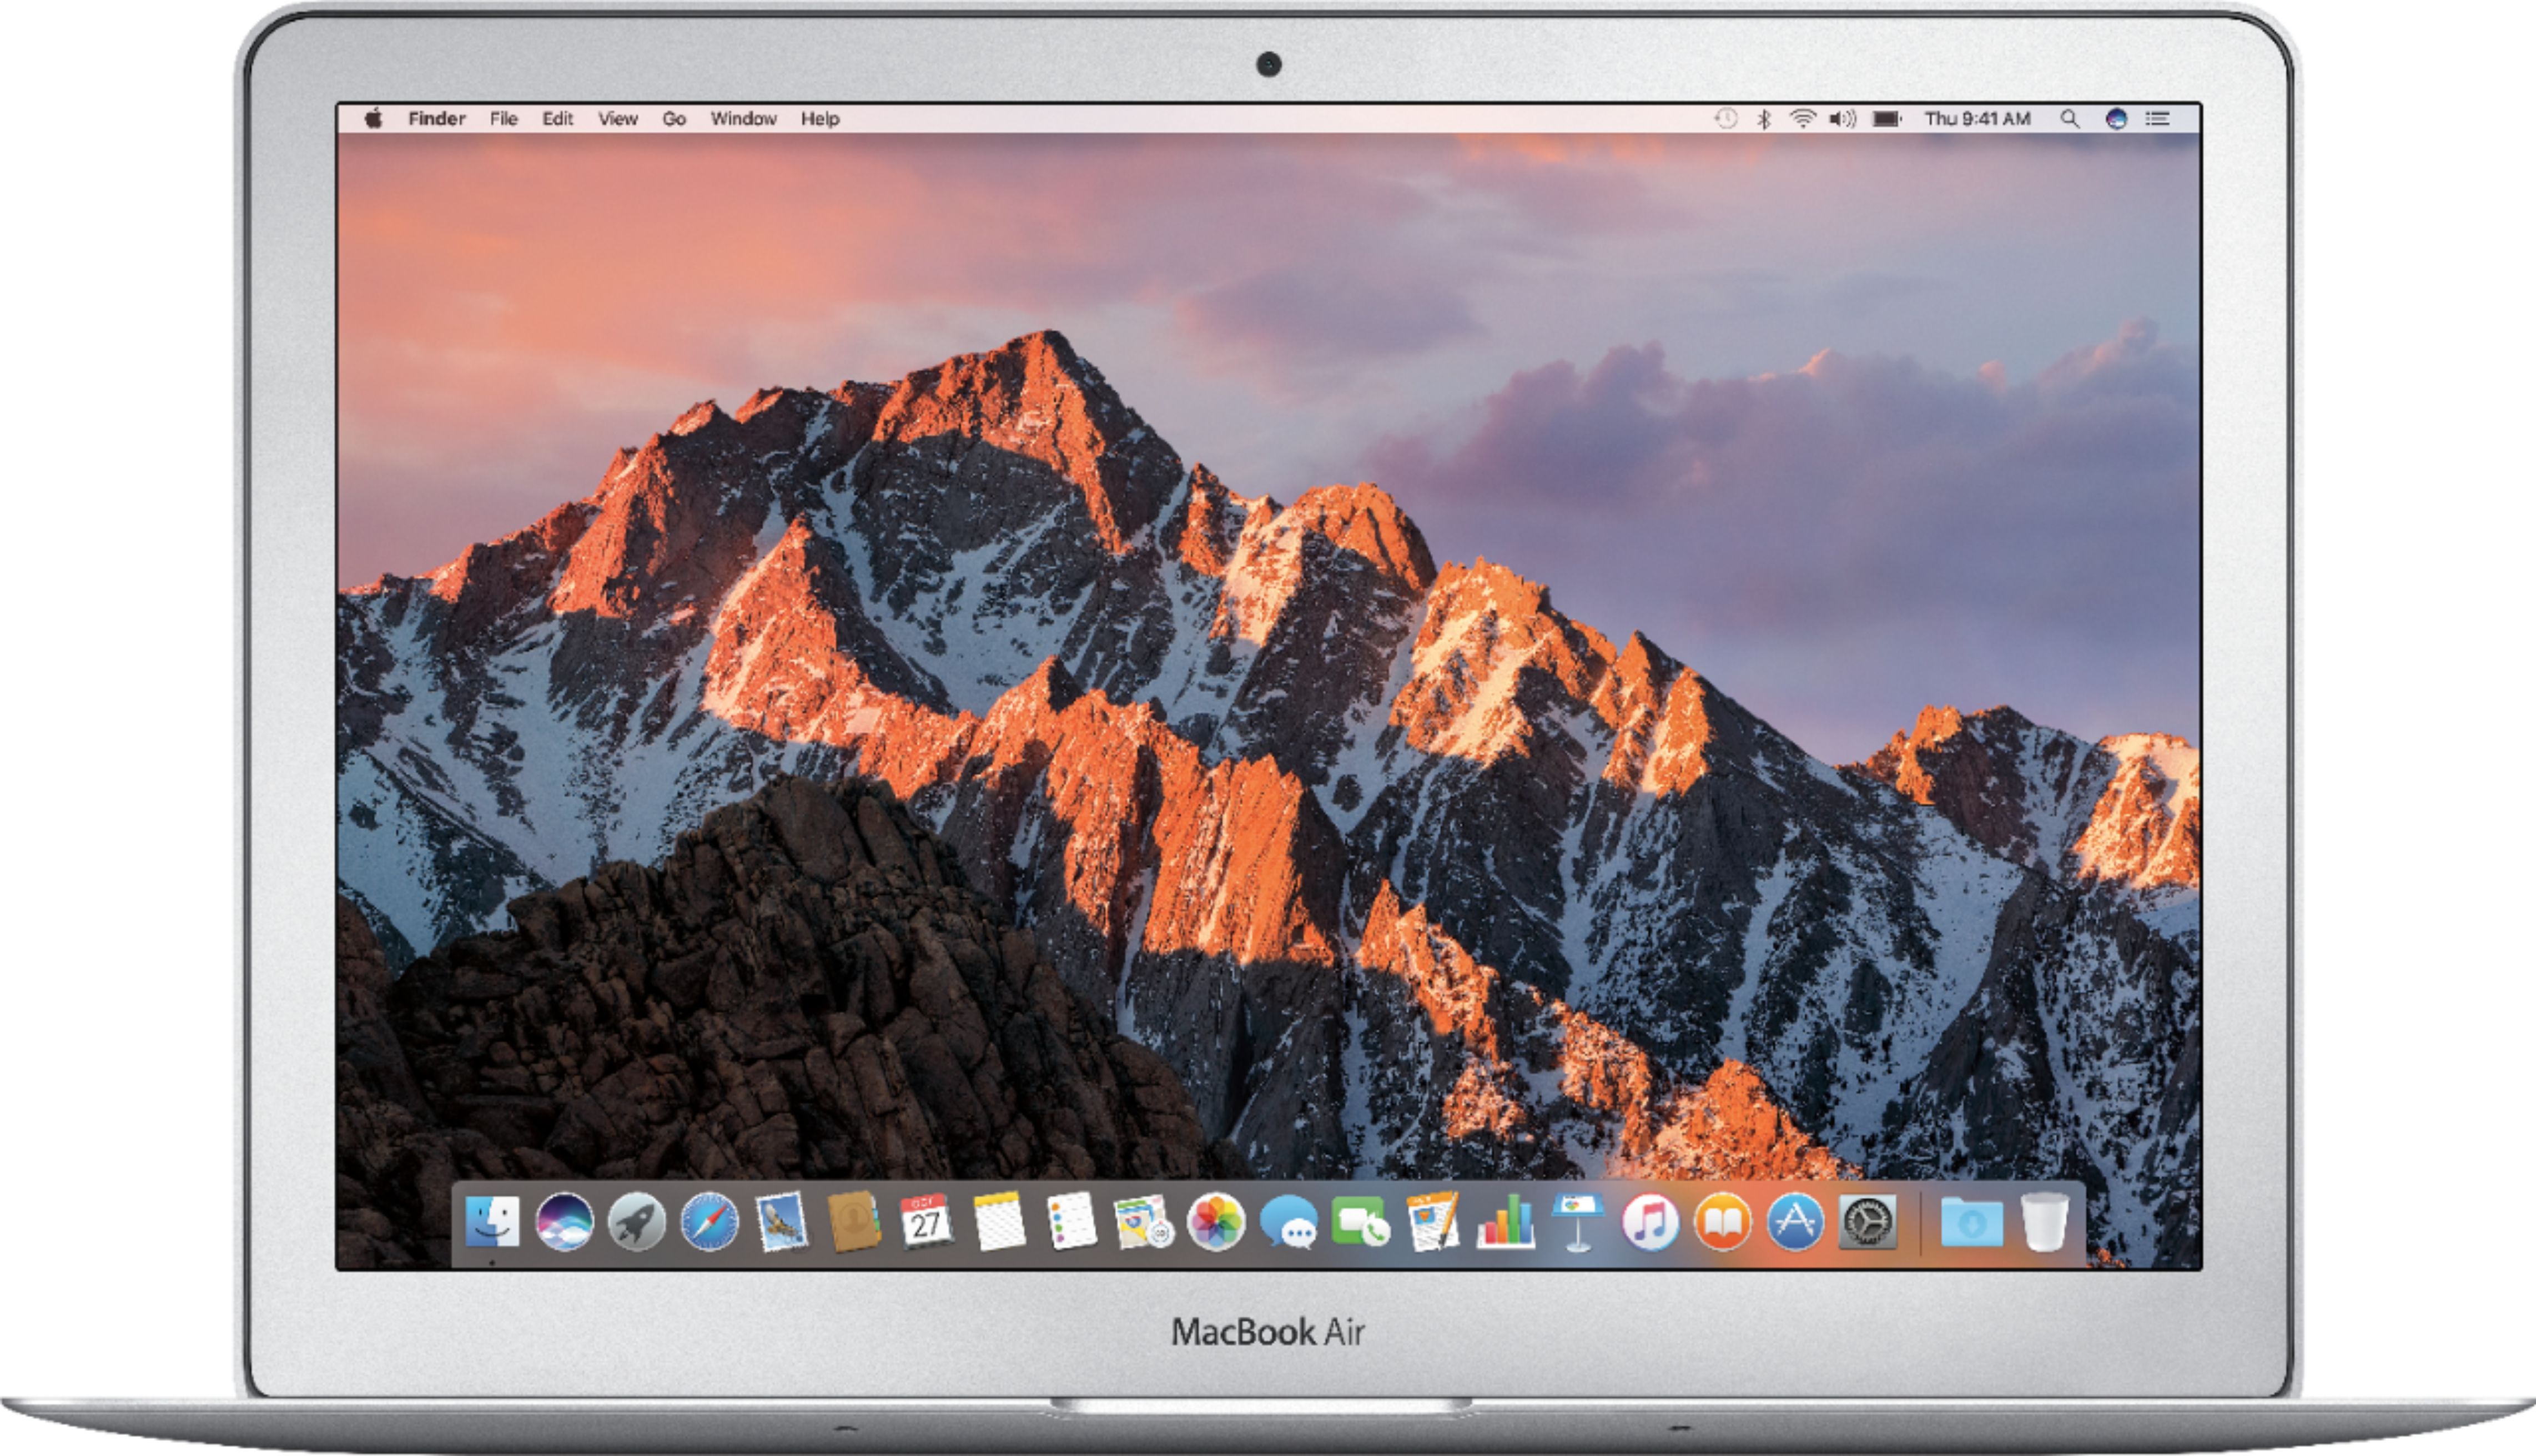 Apple MacBook Air 15-Inch Review: The Best Portable Big Display Choice -  CNET